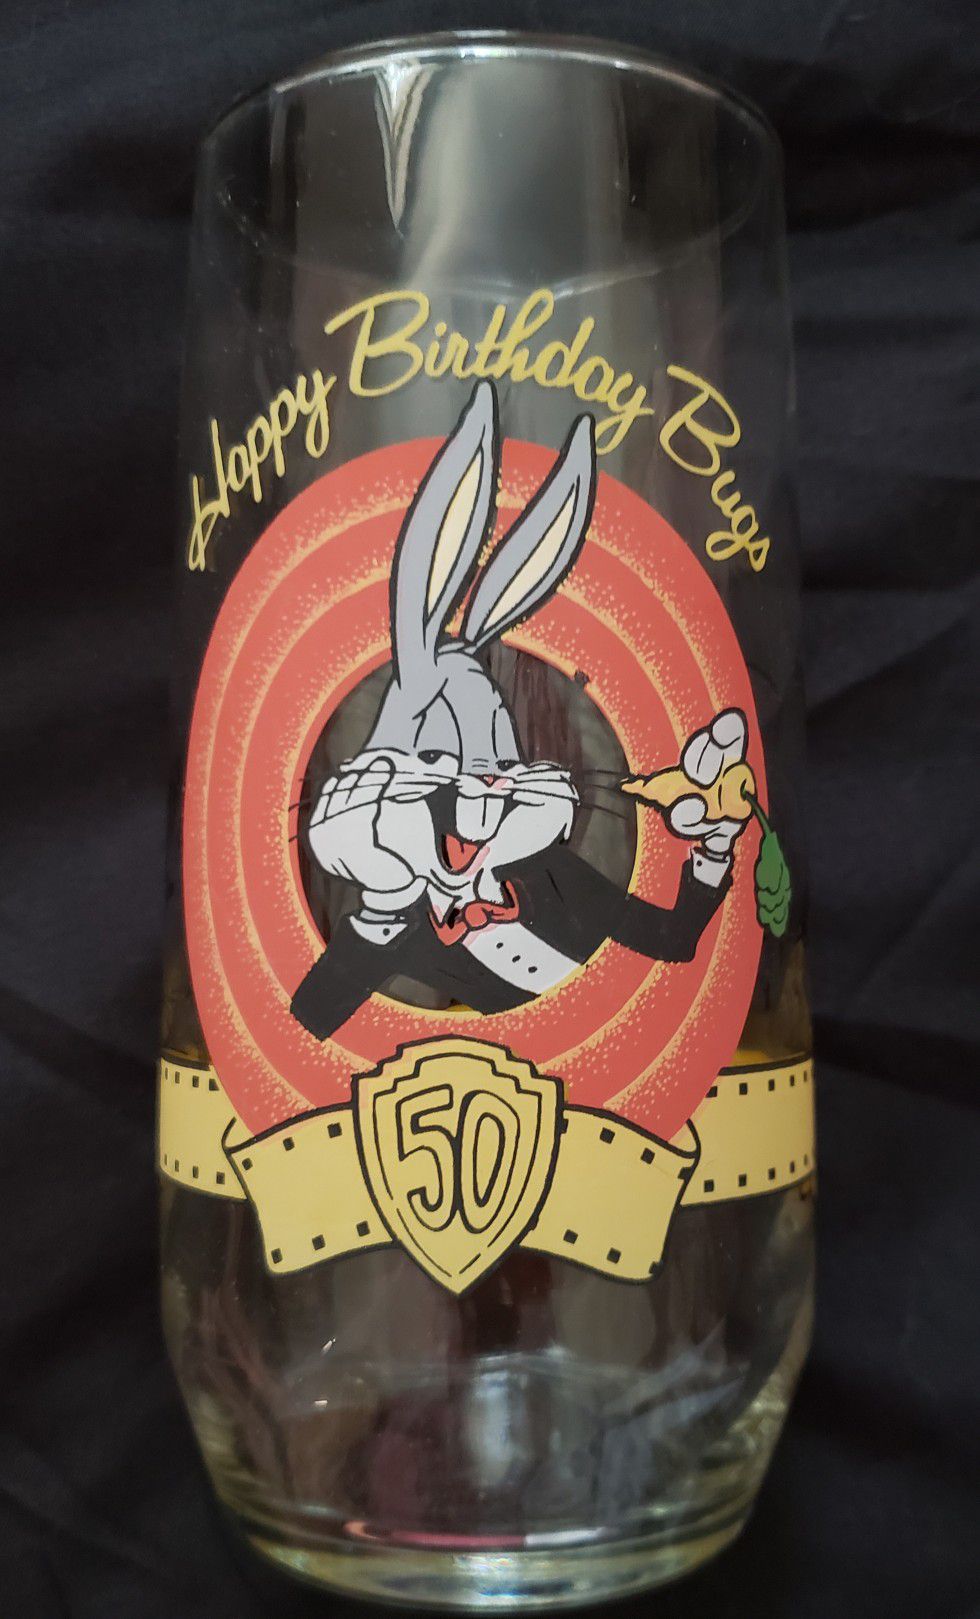 Bugs Bunny collectible 50th birthday glass. Looney Tunes